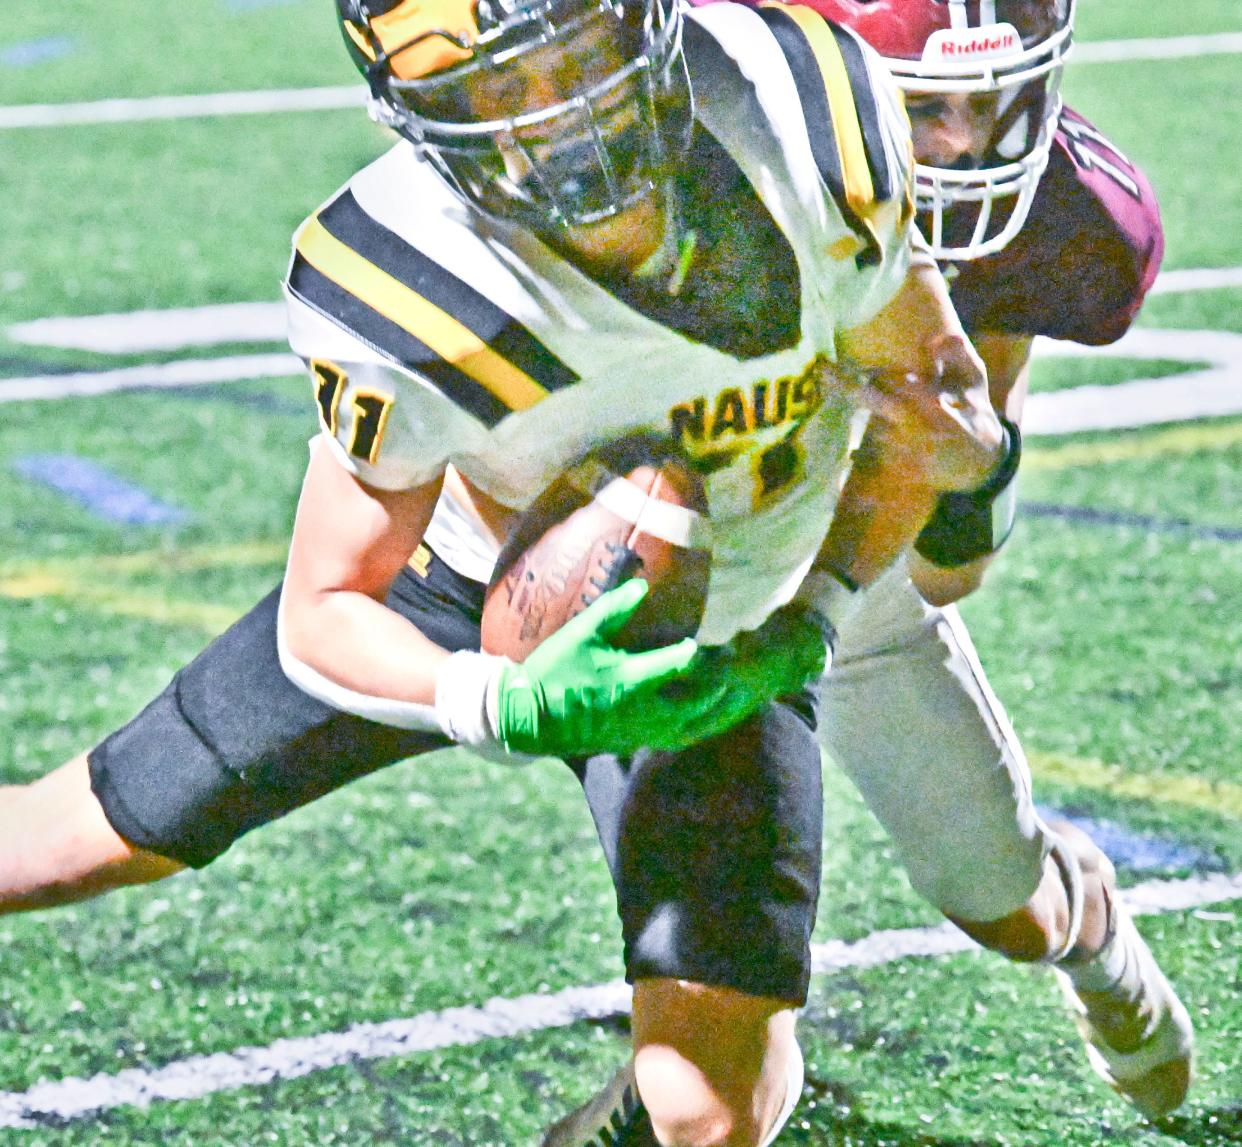 Kieran Handville of Nauset makes an over the should touchdown catch defended by Fin Patierno of Falmouth.